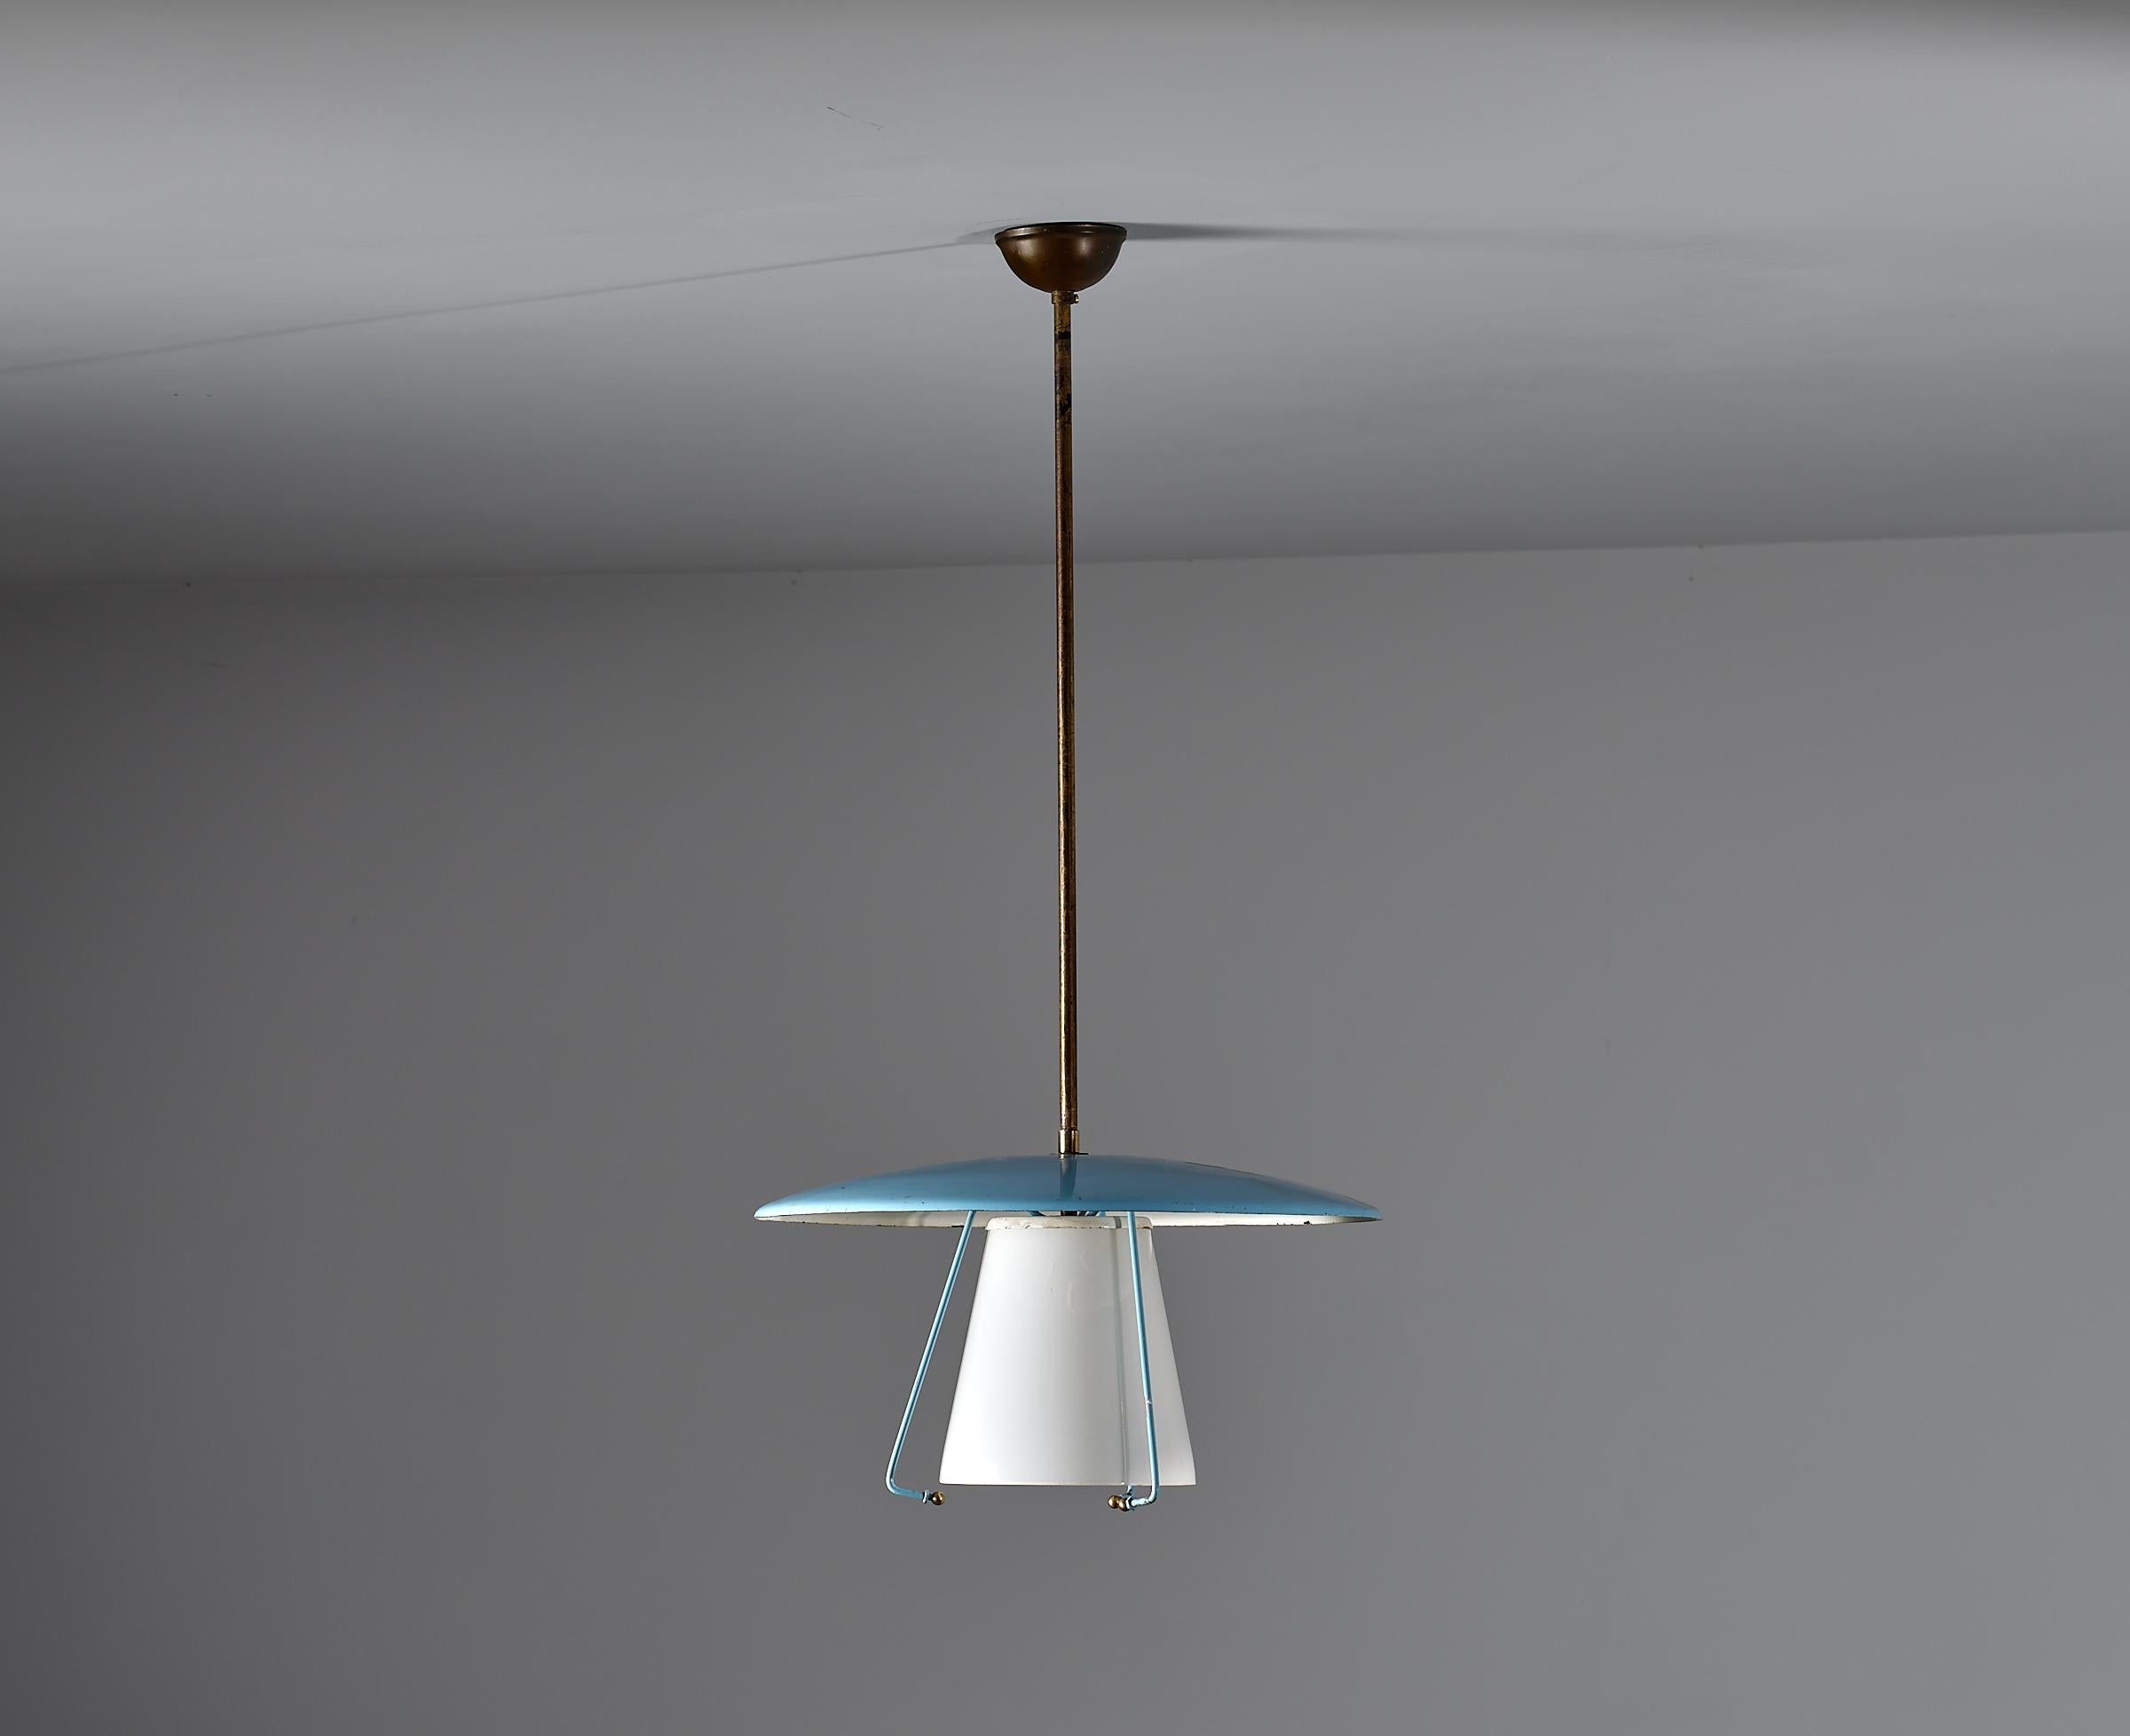 Presenting a  1950s Italian design  pendant chandelier. Meticulously crafted from brass, opaline glass, and blue lacquered metal, its modern aesthetic and subtle patina create a sophisticated centerpiece. The vintage allure of small imperfections